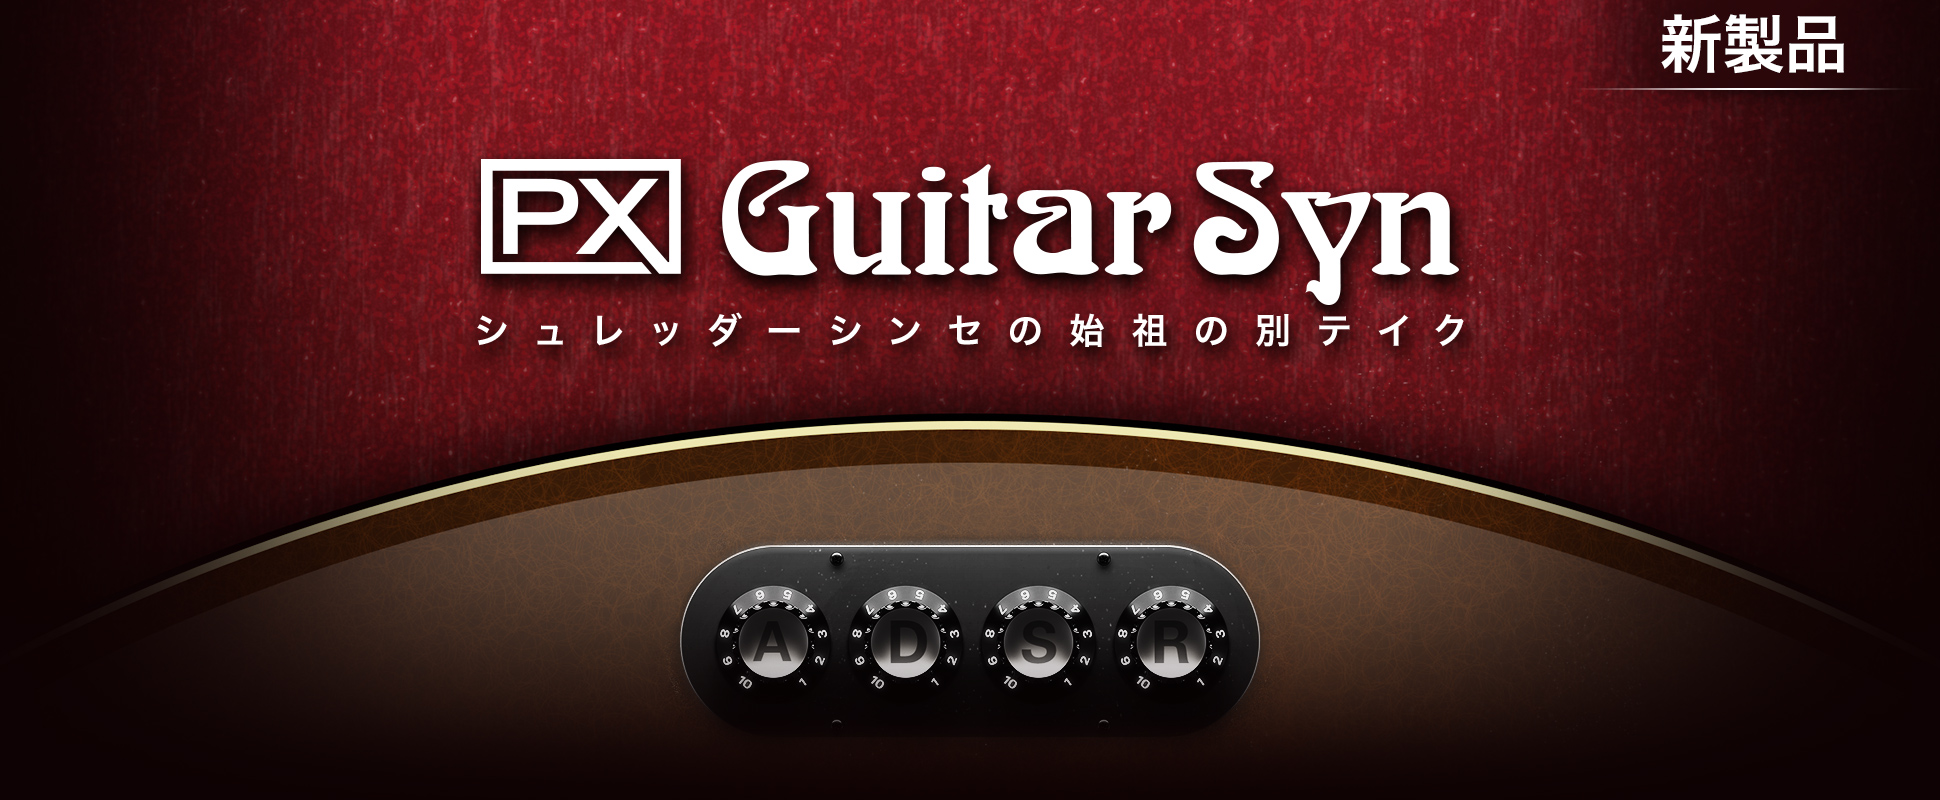 PX Guitar Syn - New